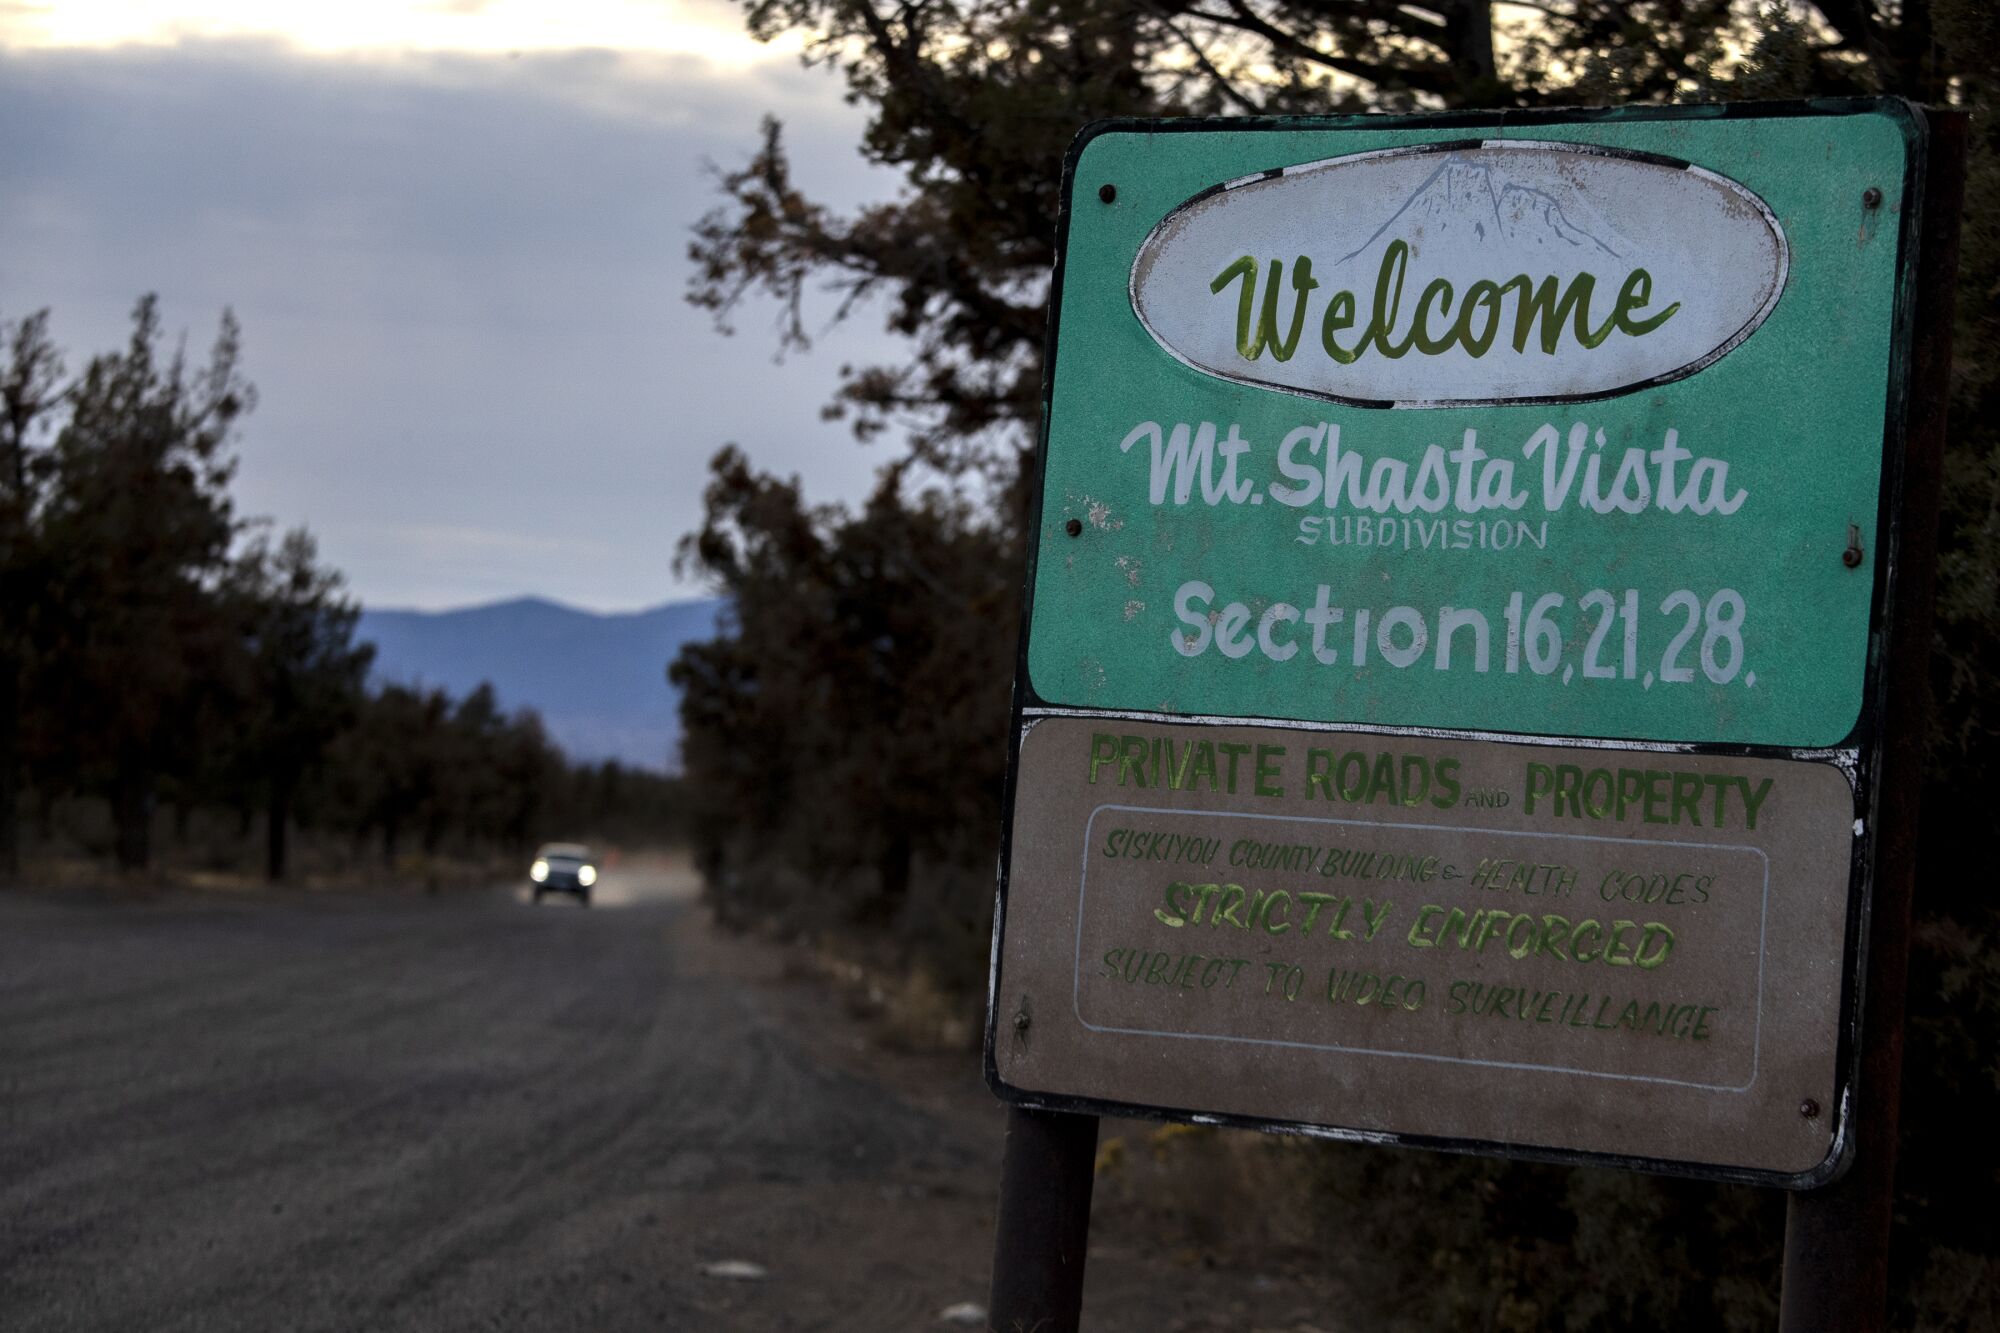 An entrance sign on a dusty road on the Mount Shasta Vista subdivision in Siskiyou County.